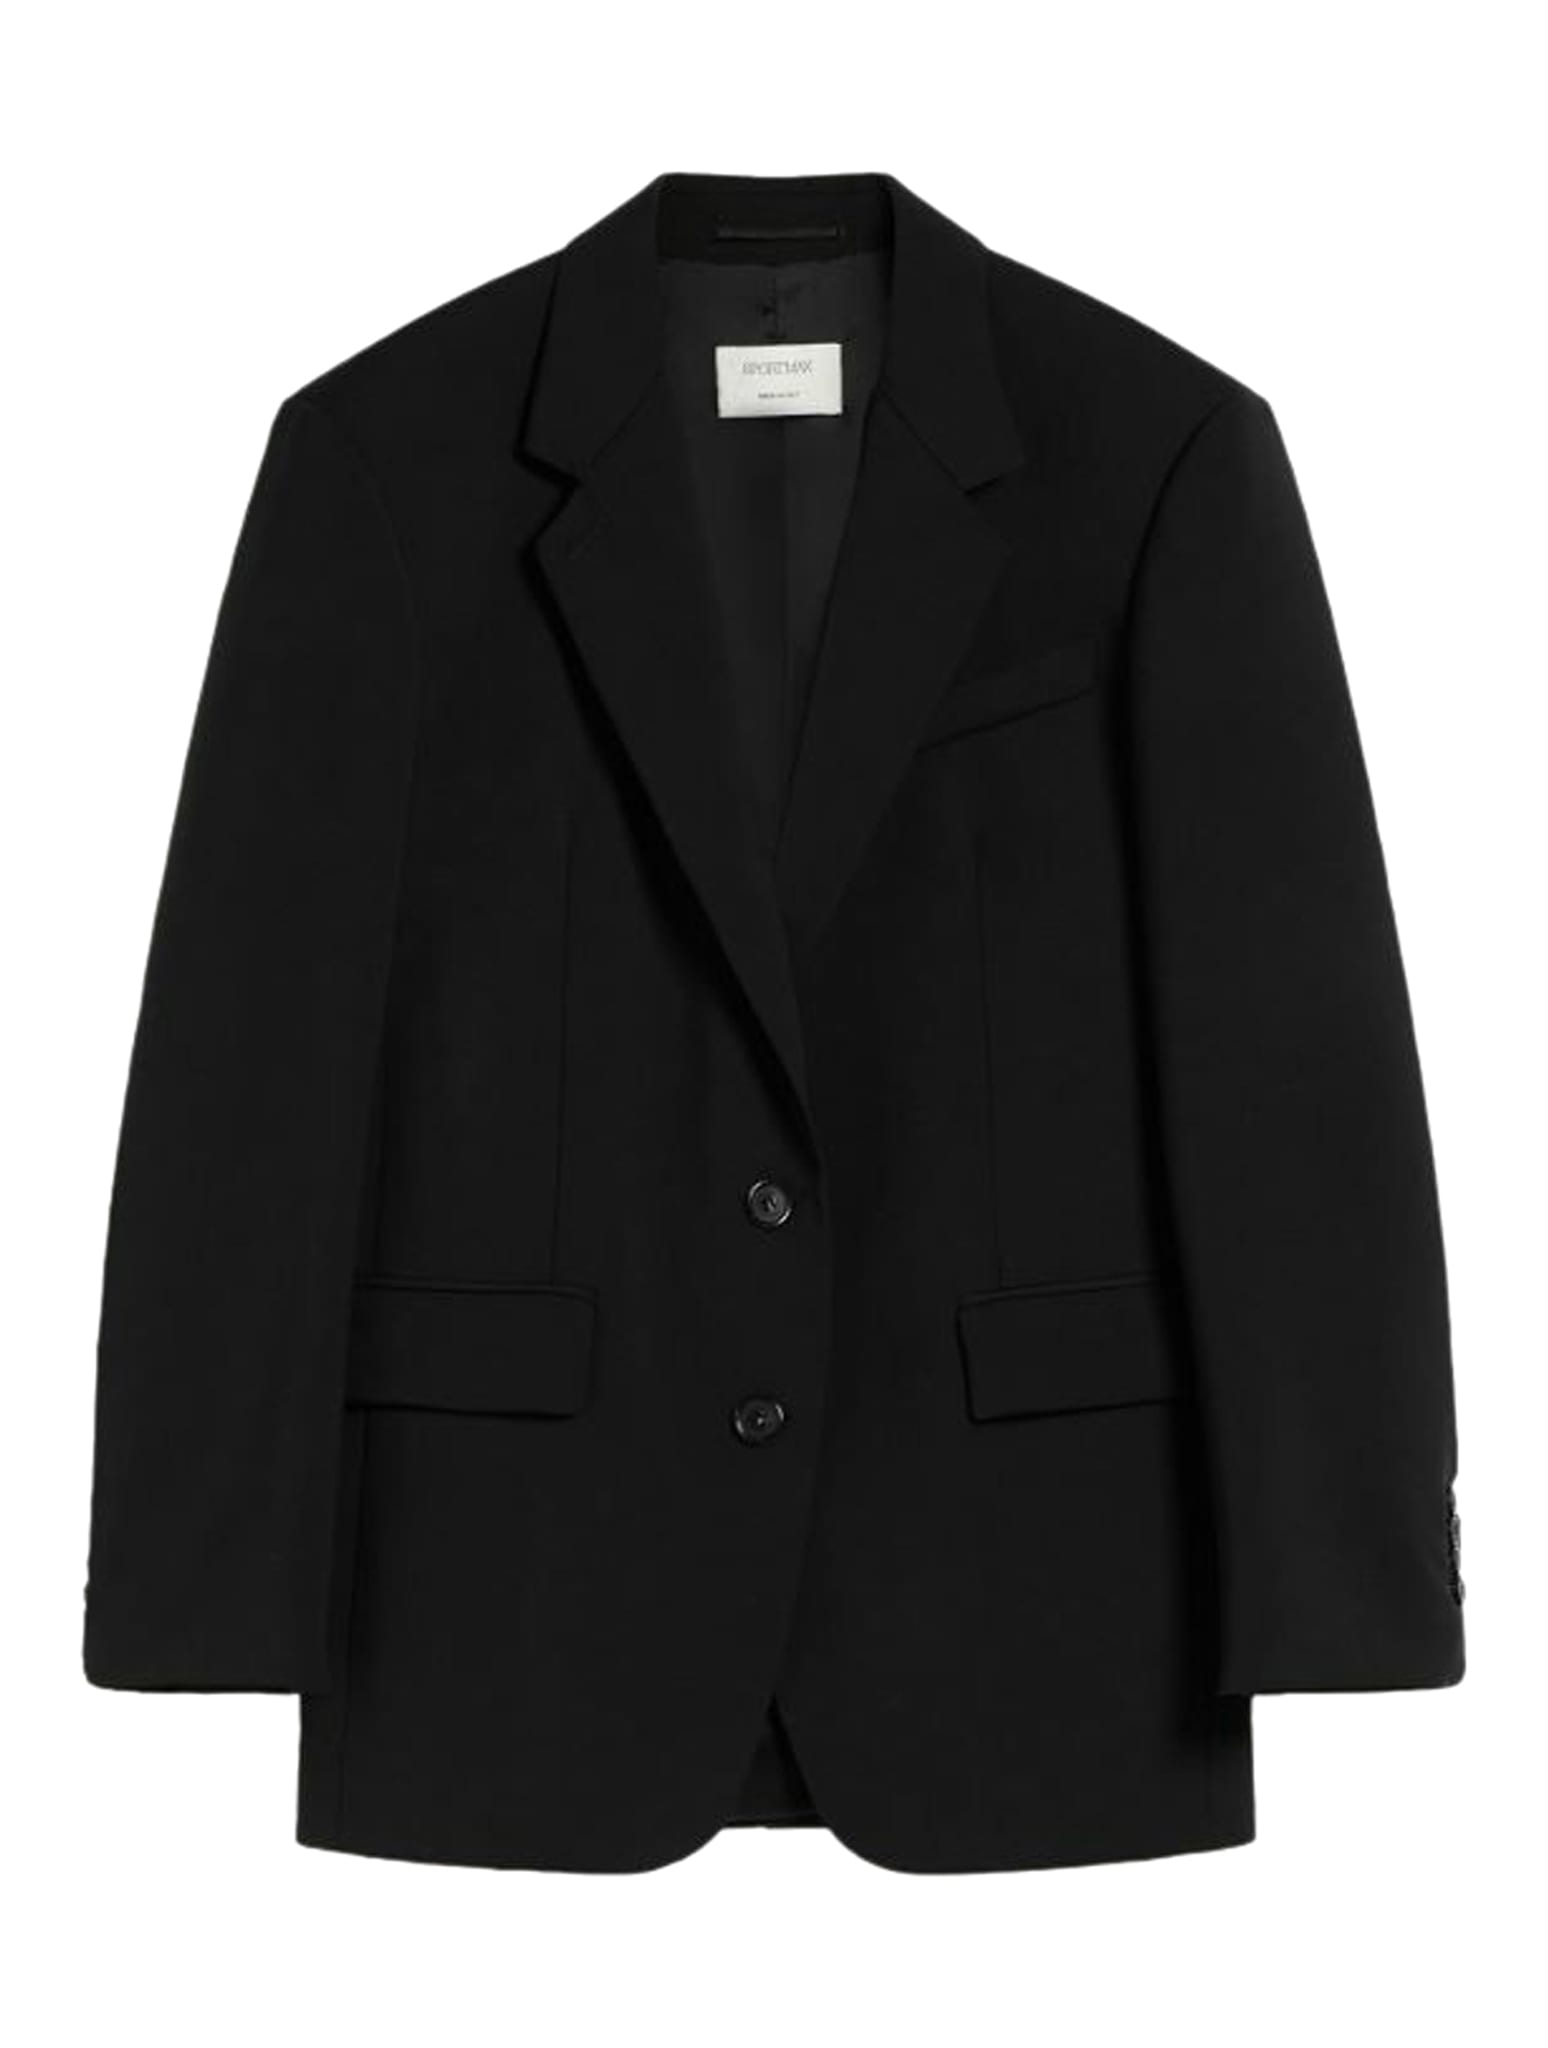 made in ITALY SPORTMAX suits setup - 2